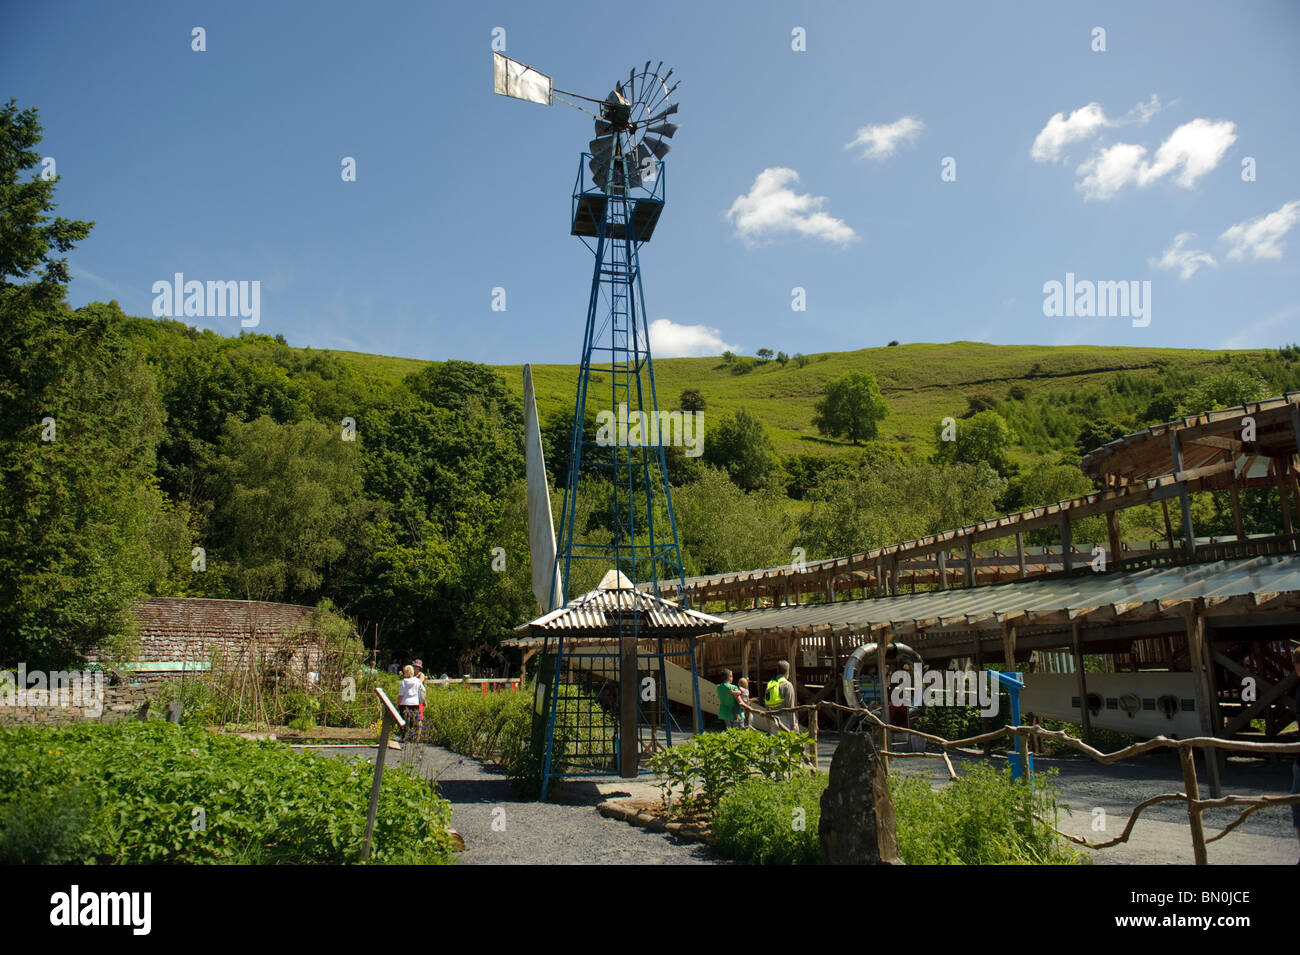 Il Centre for Alternative Technology, Machynlleth, Powys Wales UK Foto Stock